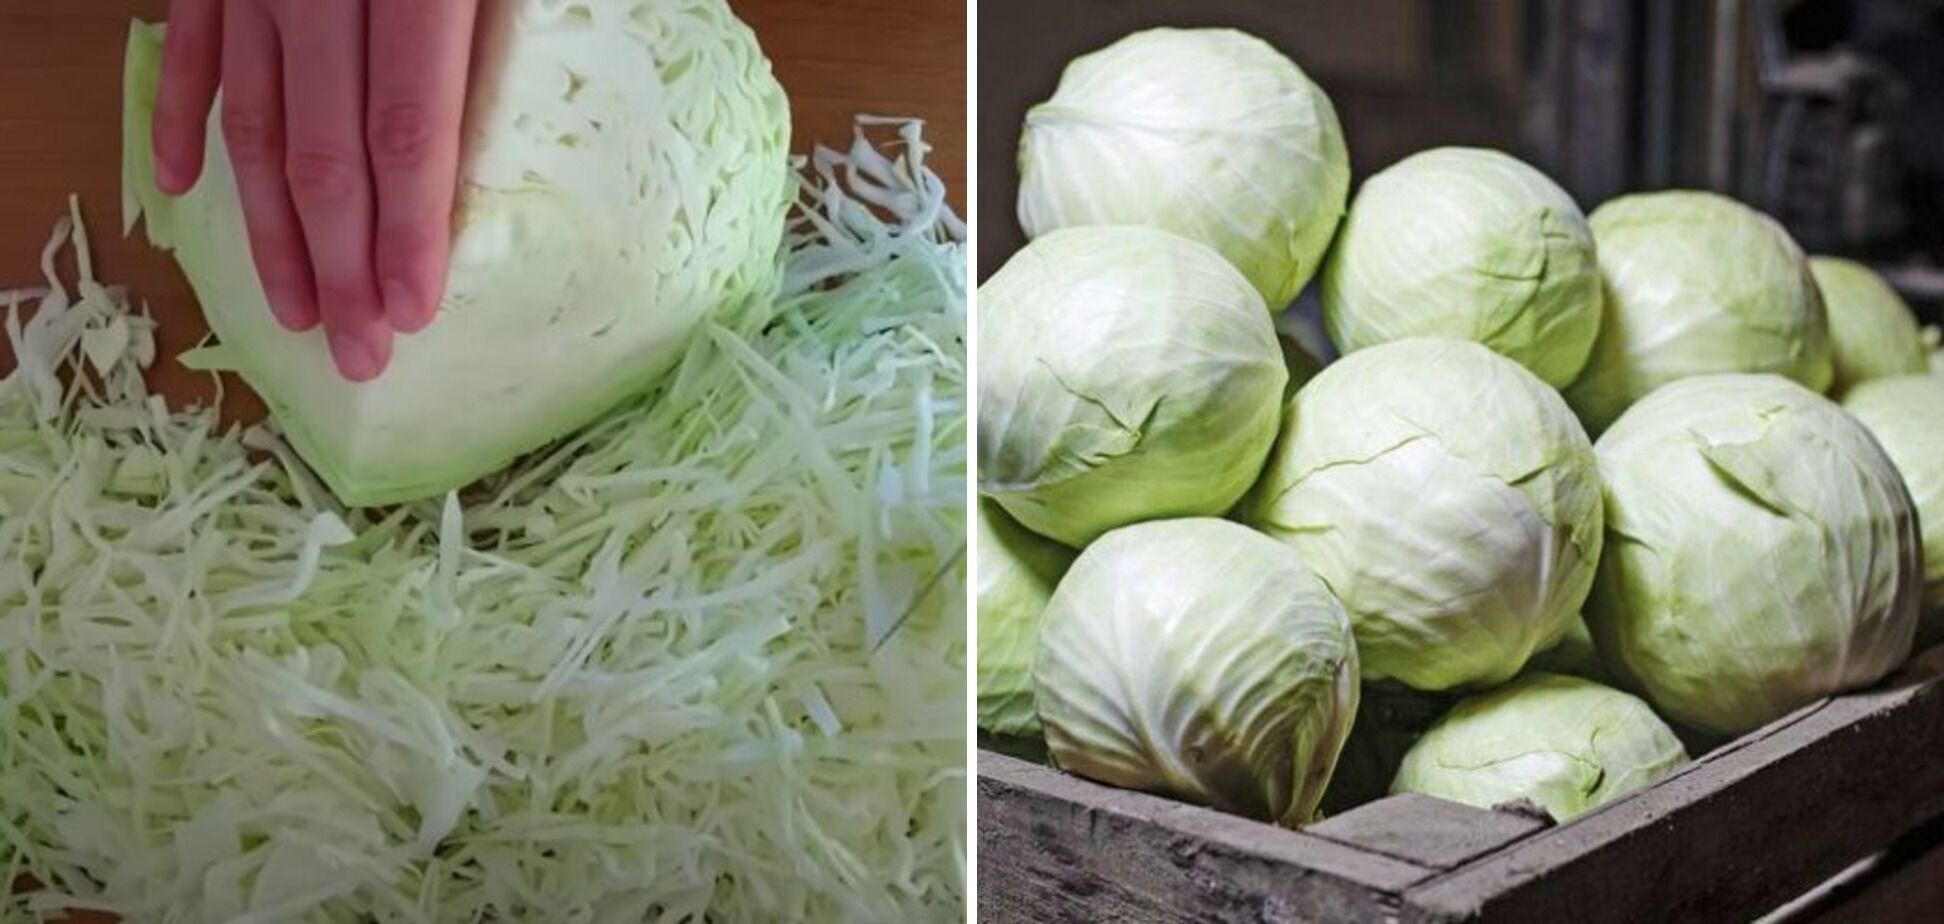 What dishes are not suitable for cooking sauerkraut: they should not be used